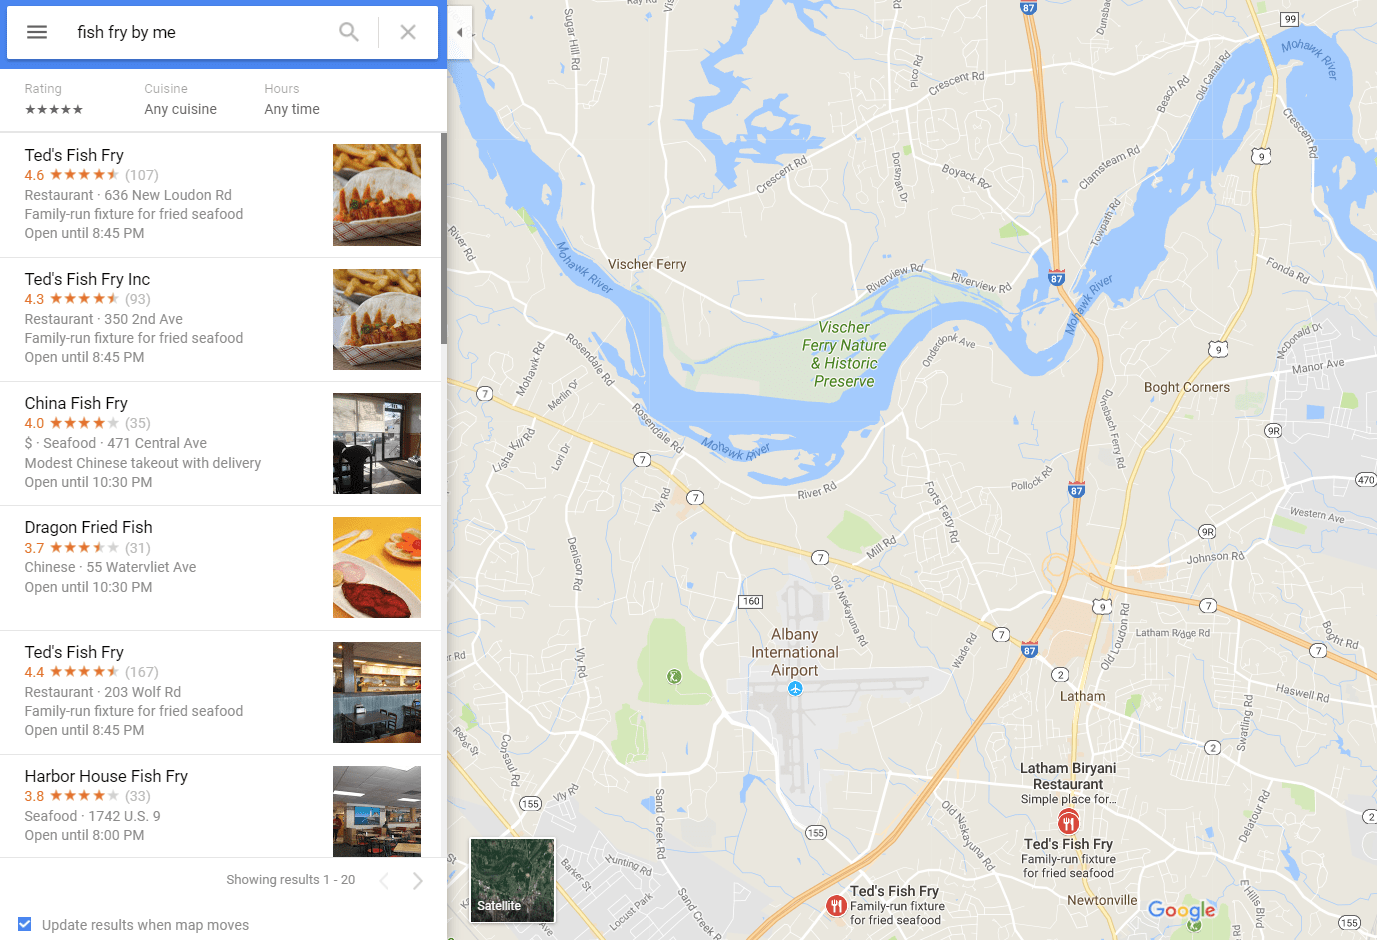 Google local pack was one effect of the Pigeon update that improved local search